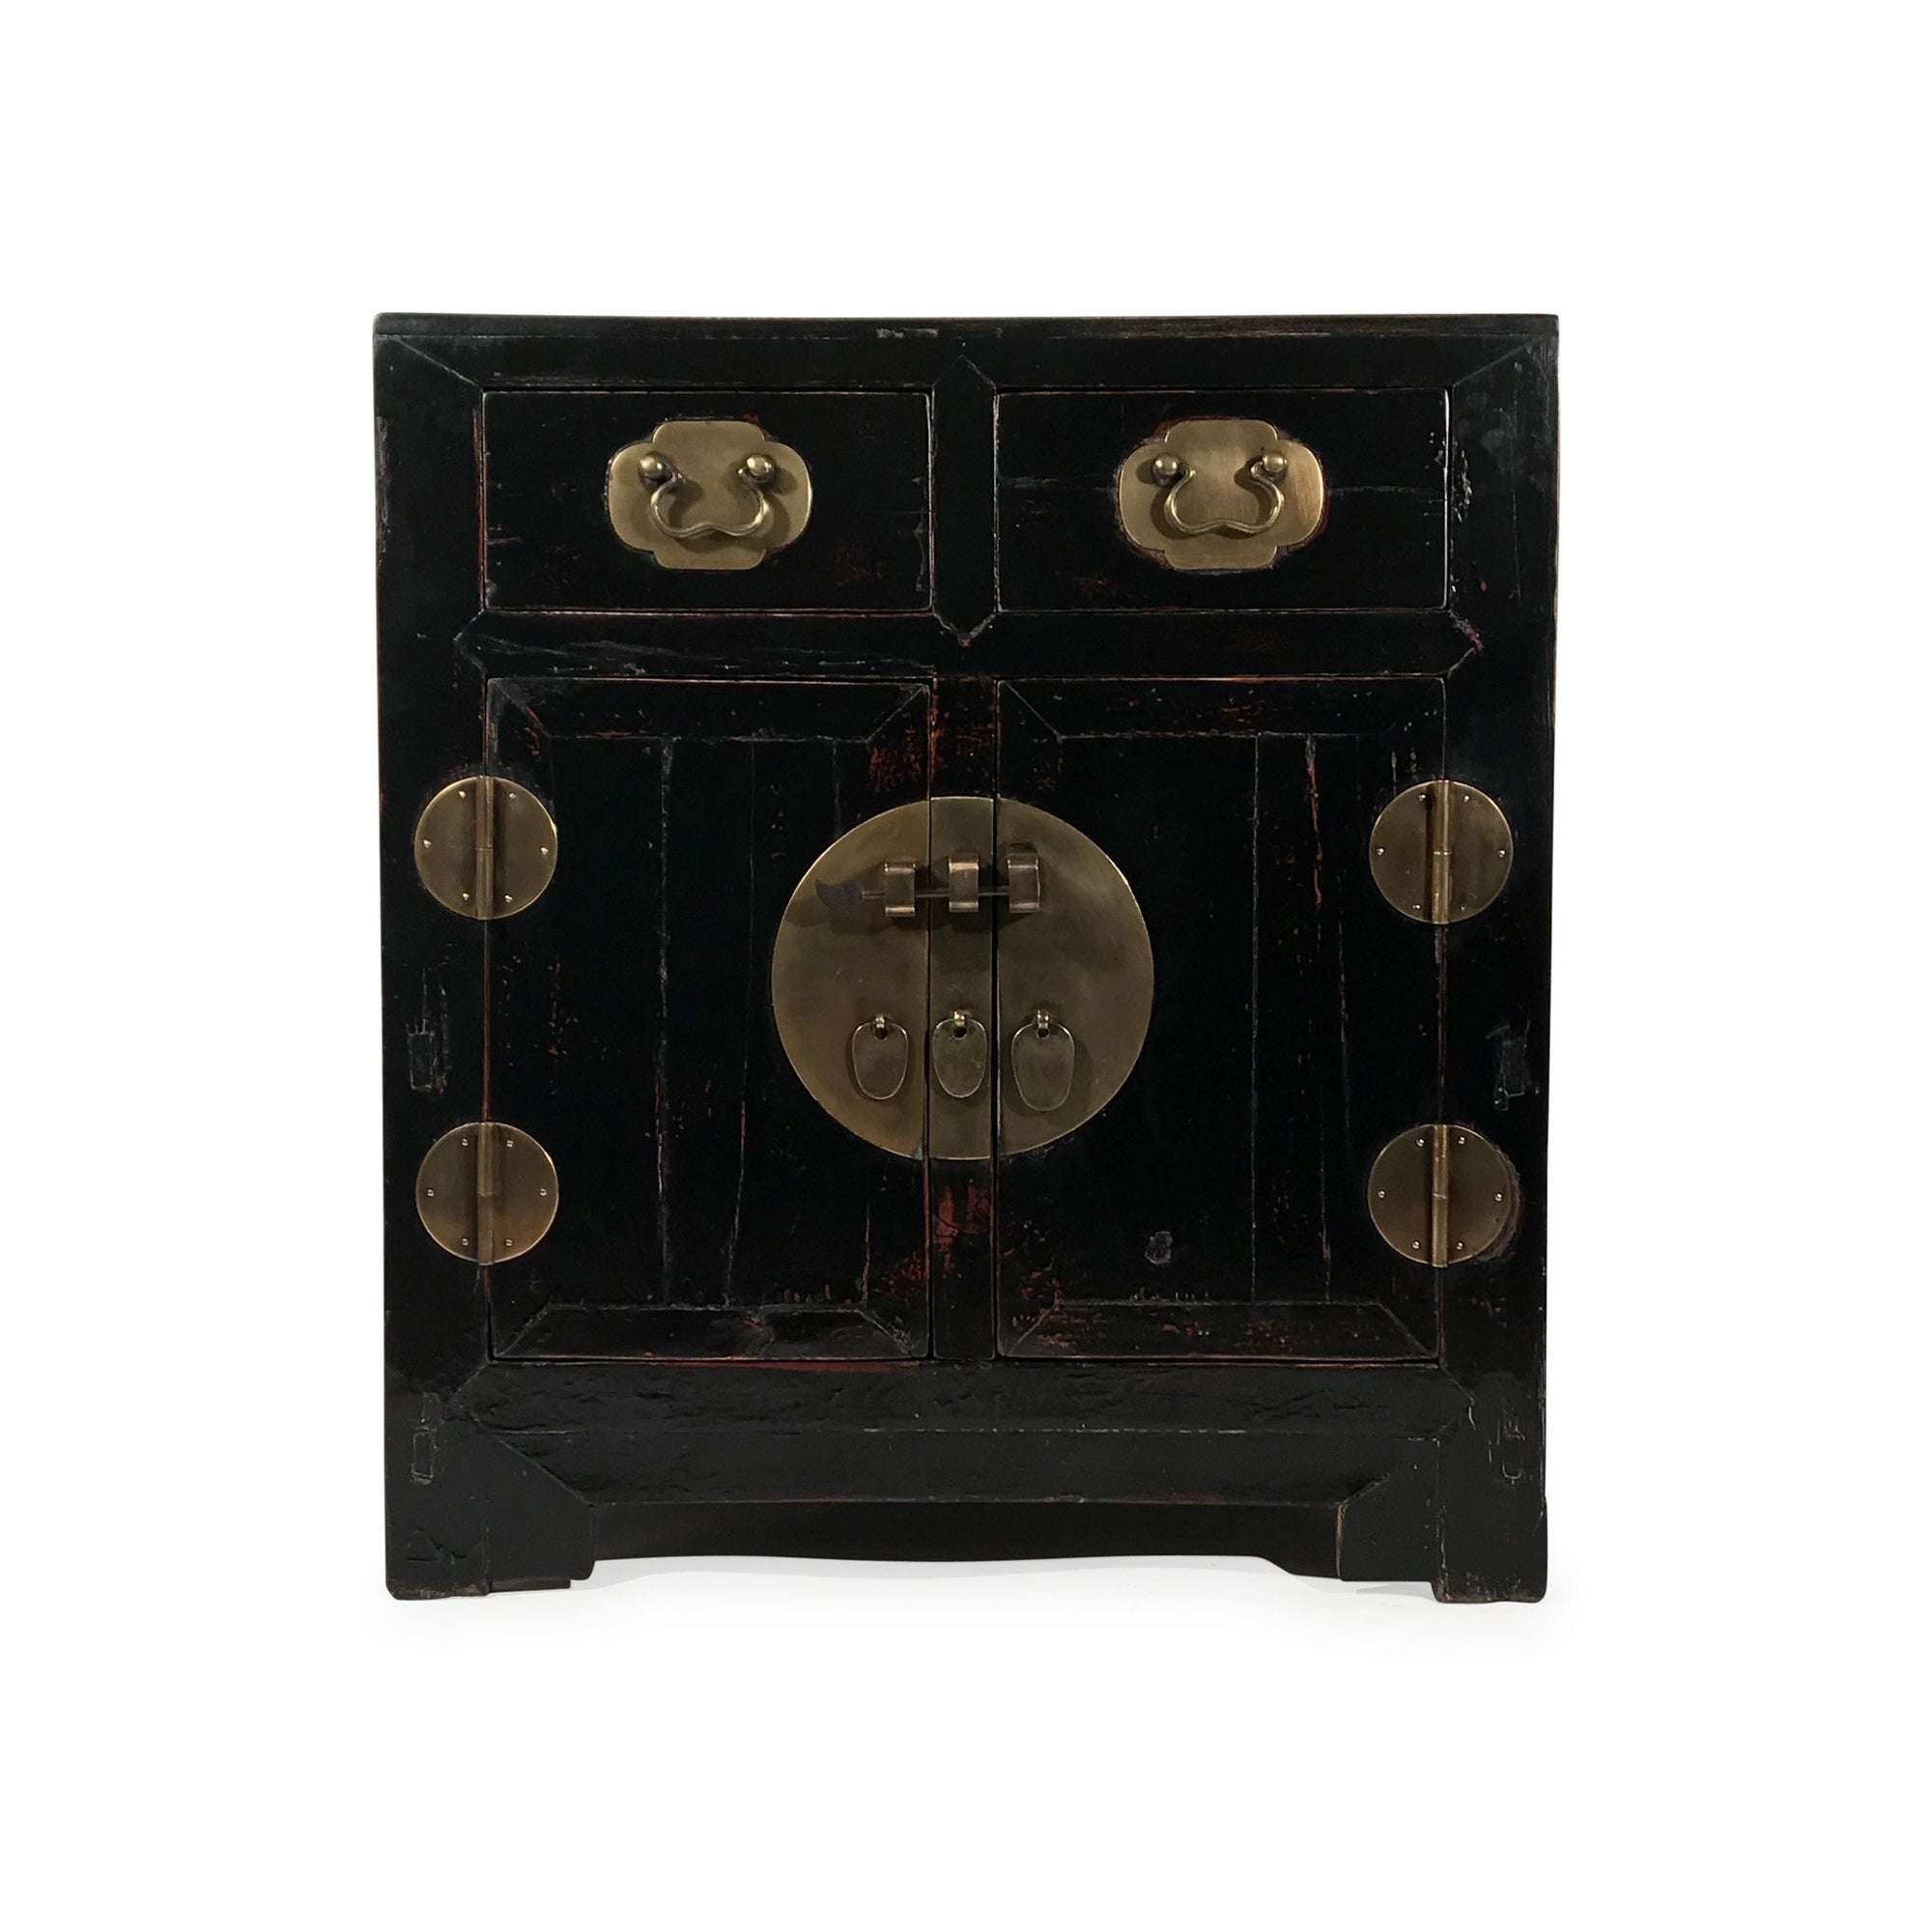 Black Lacquer Sideboard From Tianjin - 19thC - 83 x 48 x 91 (wxdxh cms) - C1496V2